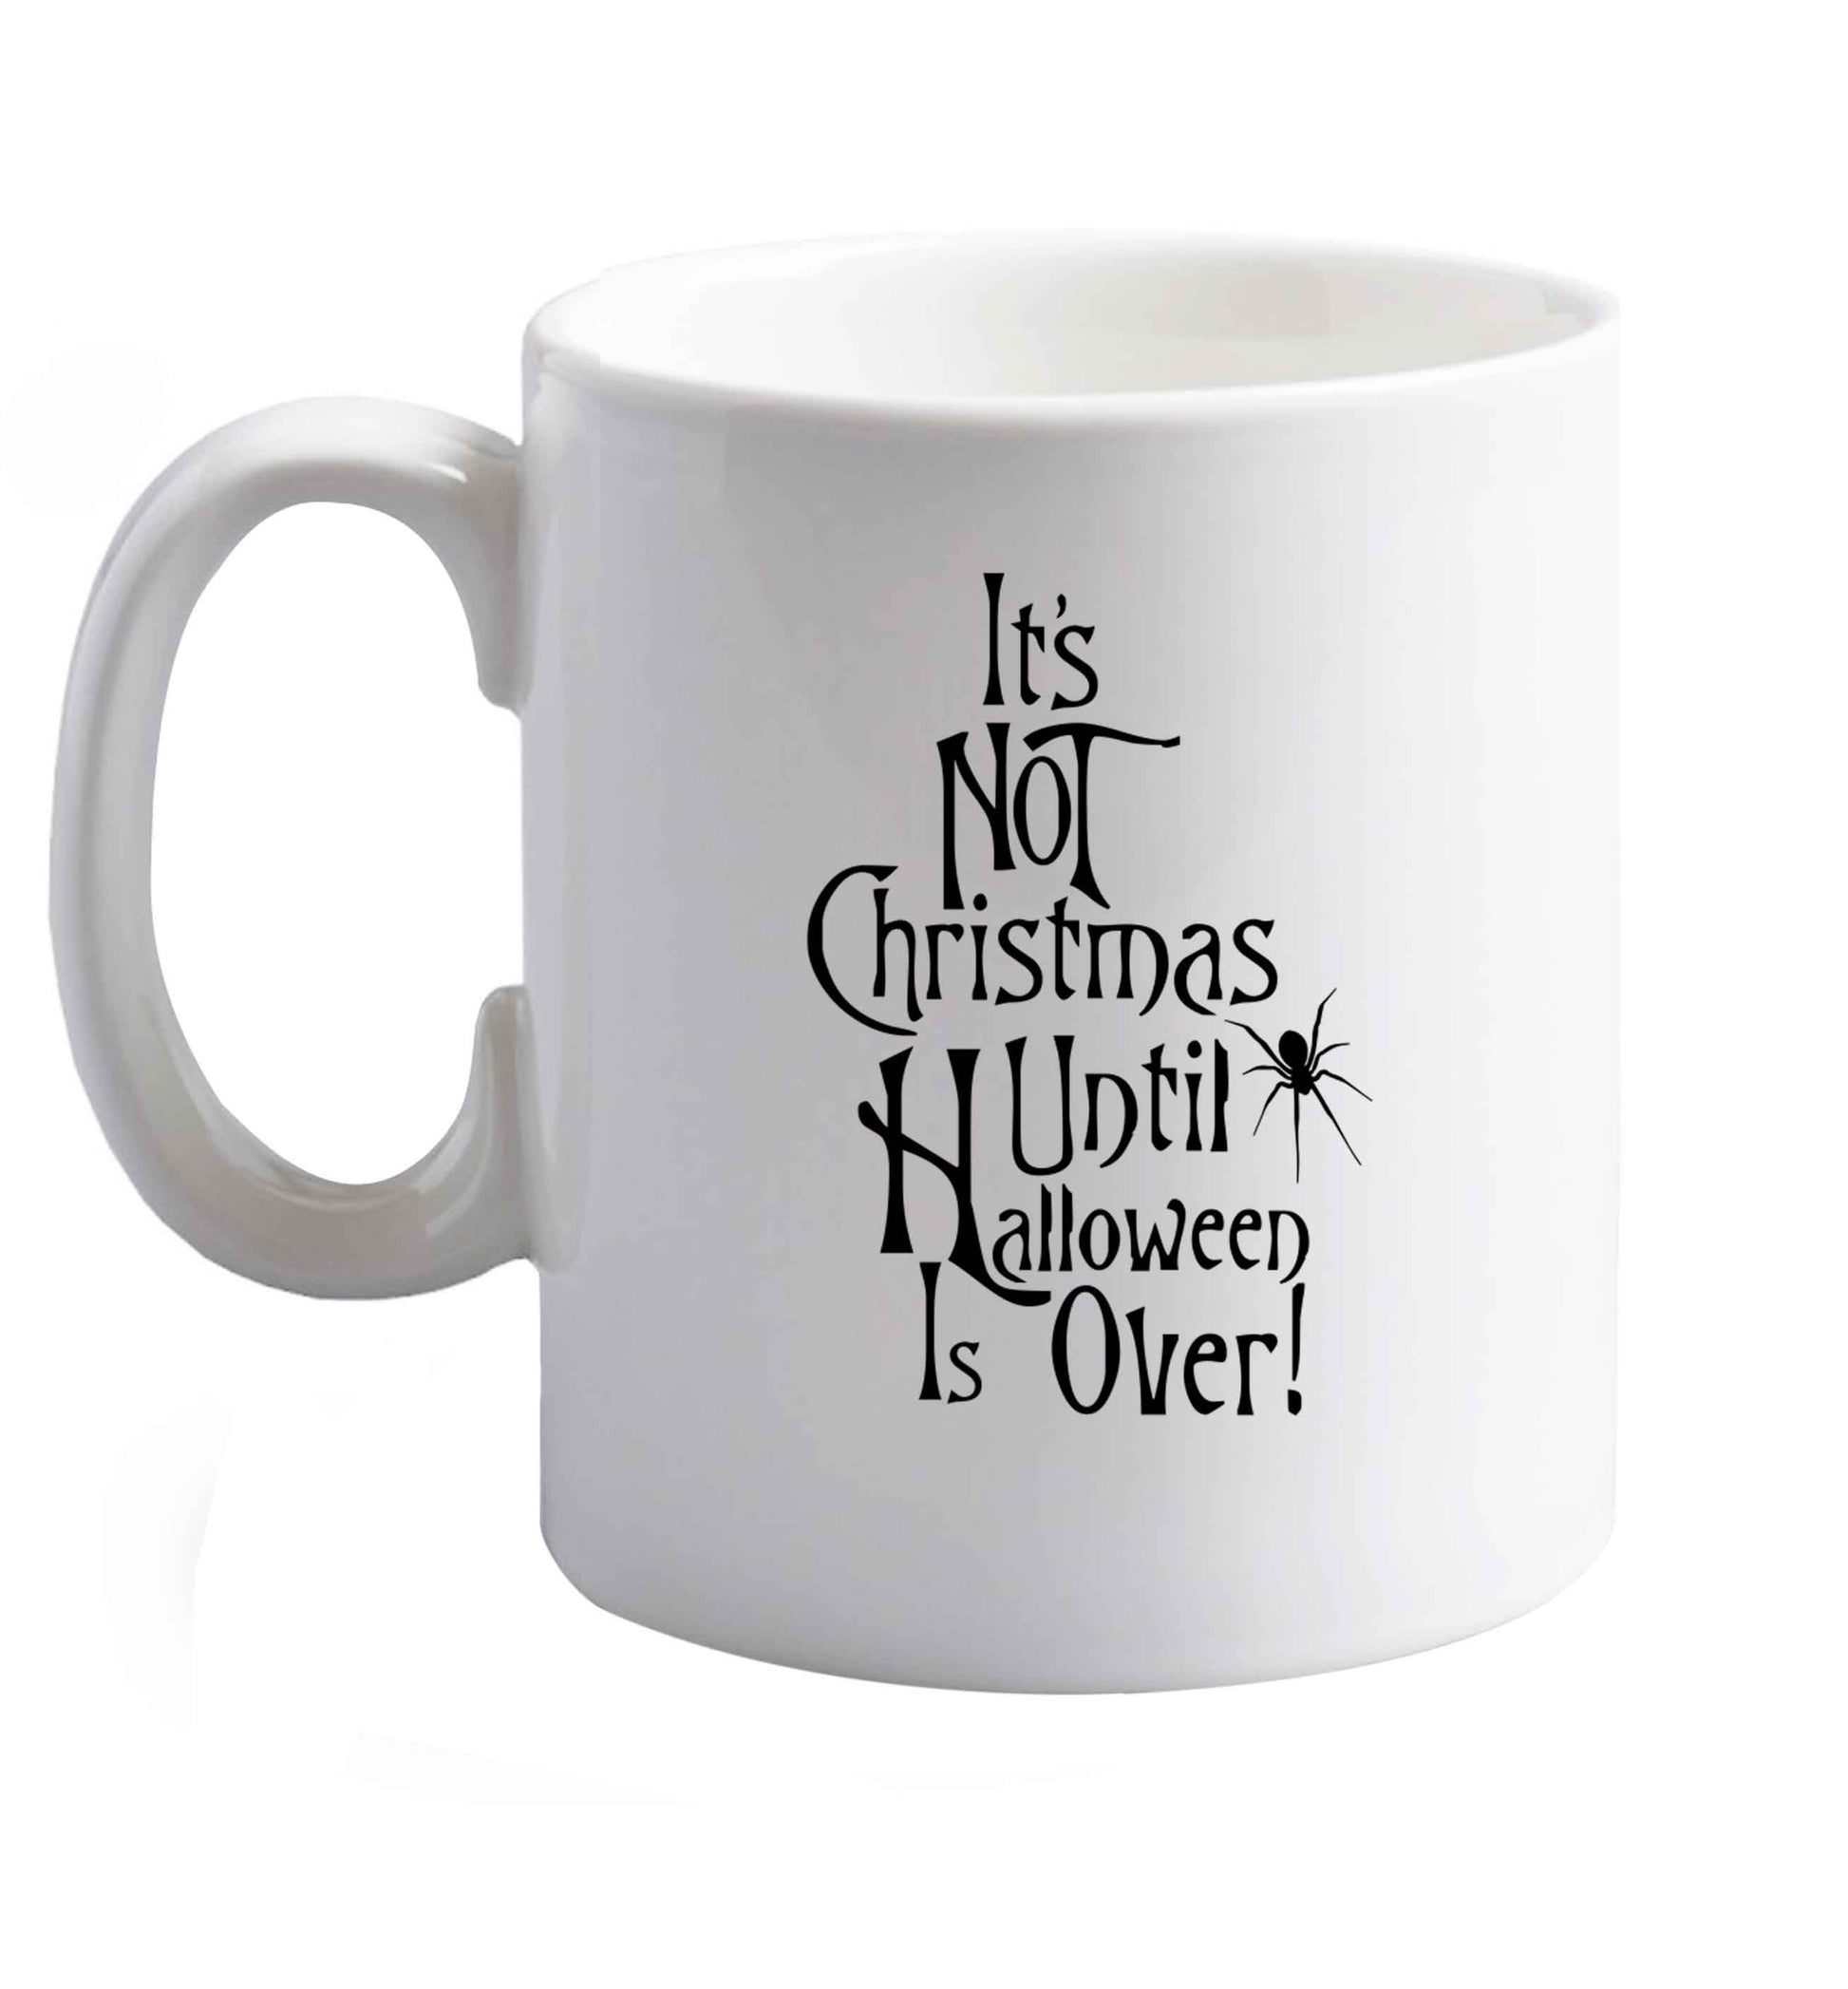 10 oz It's not Christmas until Halloween is over ceramic mug right handed